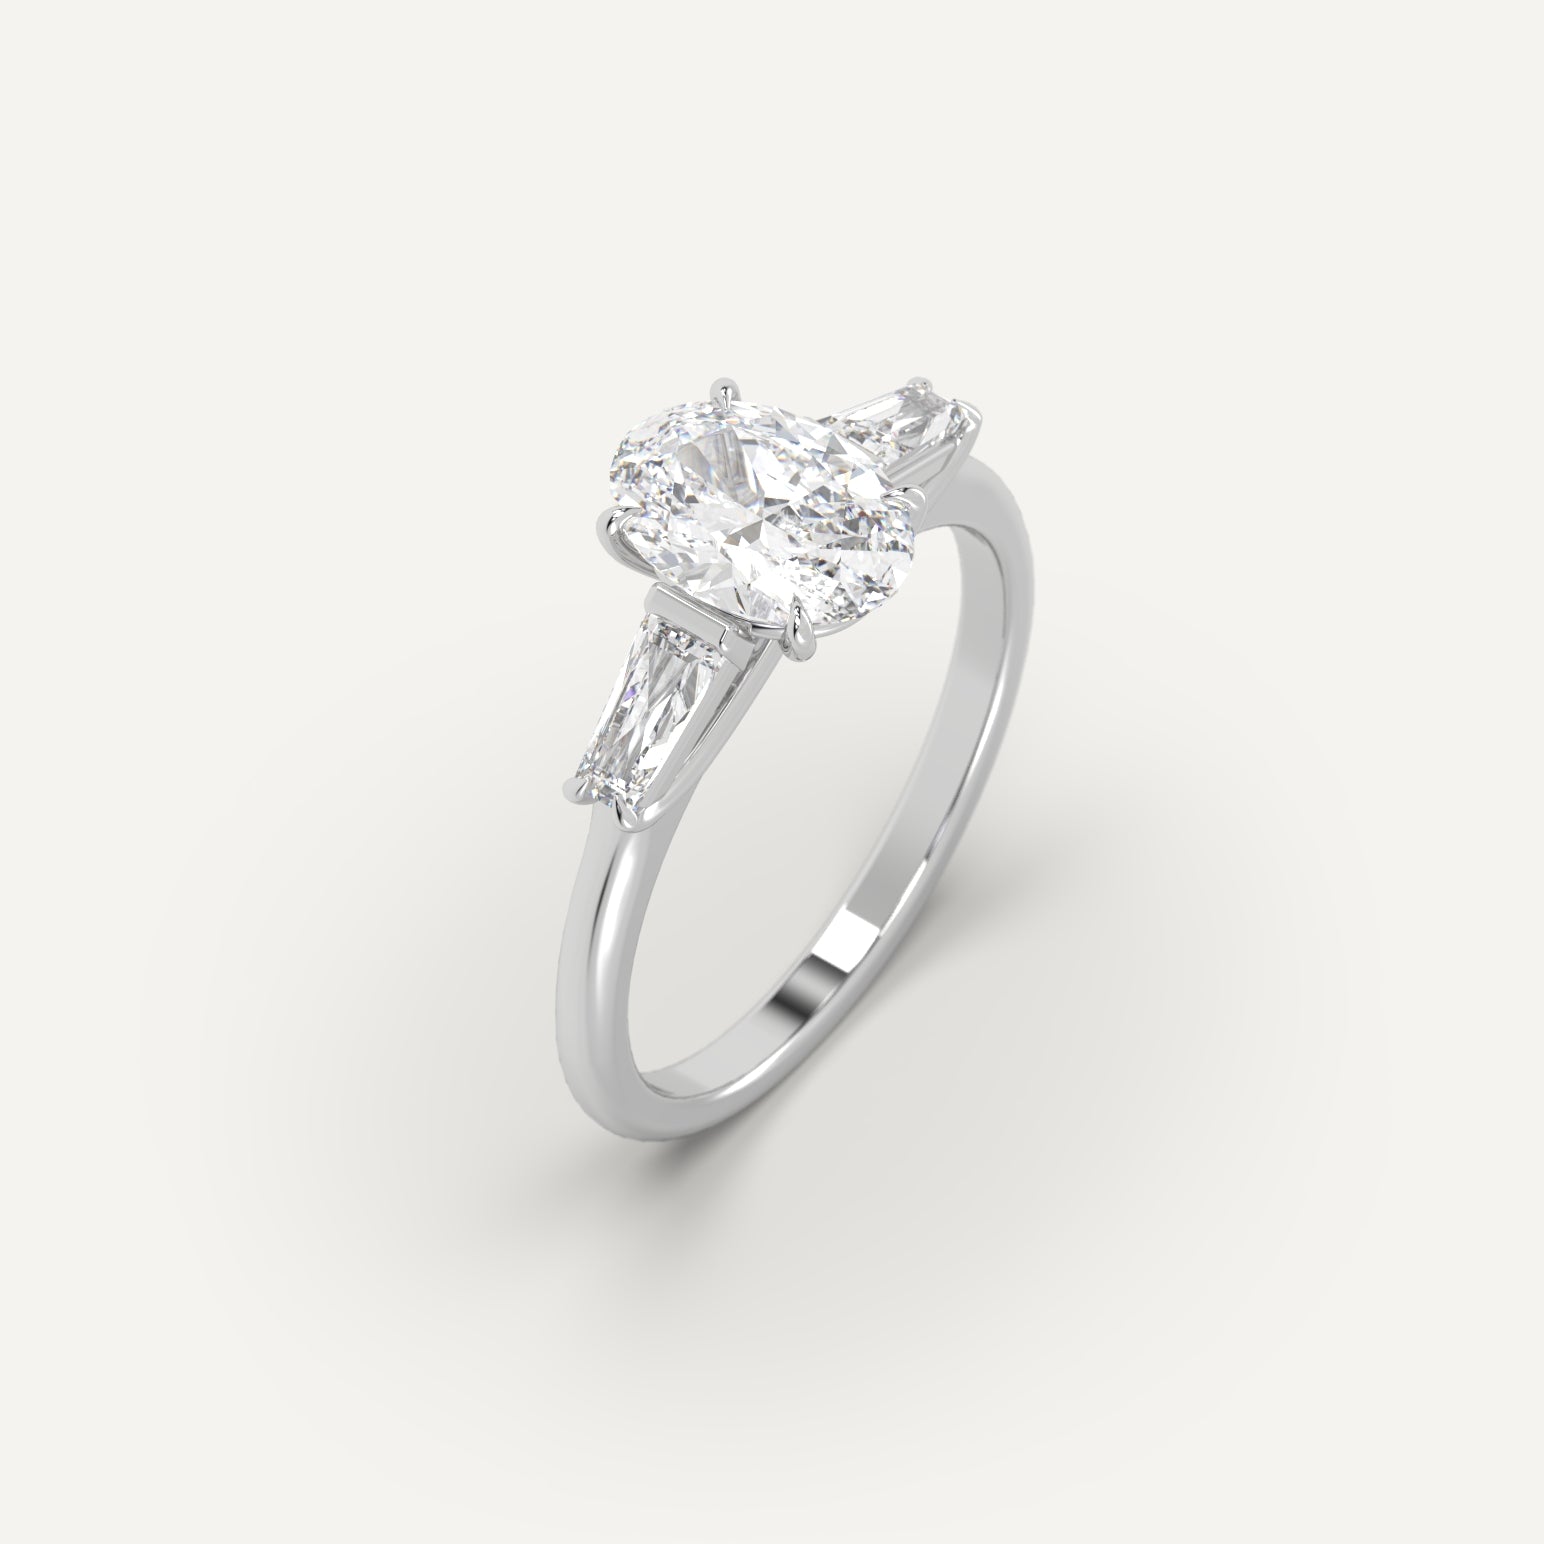 1 carat Oval Cut Engagement Ring in 14k White Gold